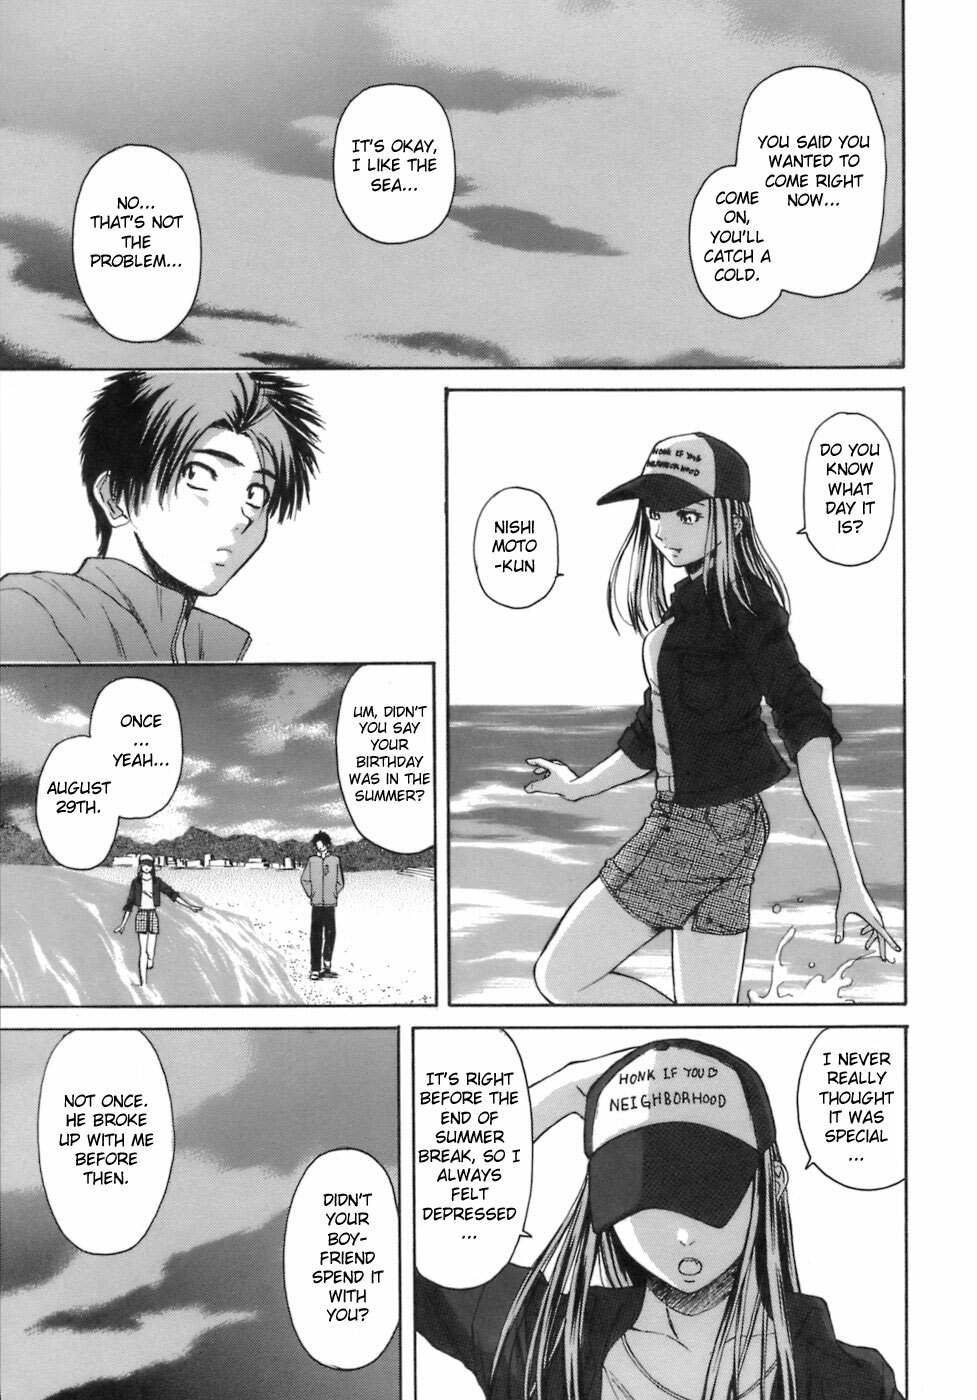 [Fuuga] Kyoushi to Seito to - Teacher and Student Ch. 6 [English] [AKnightWhoSaysNi!] page 33 full